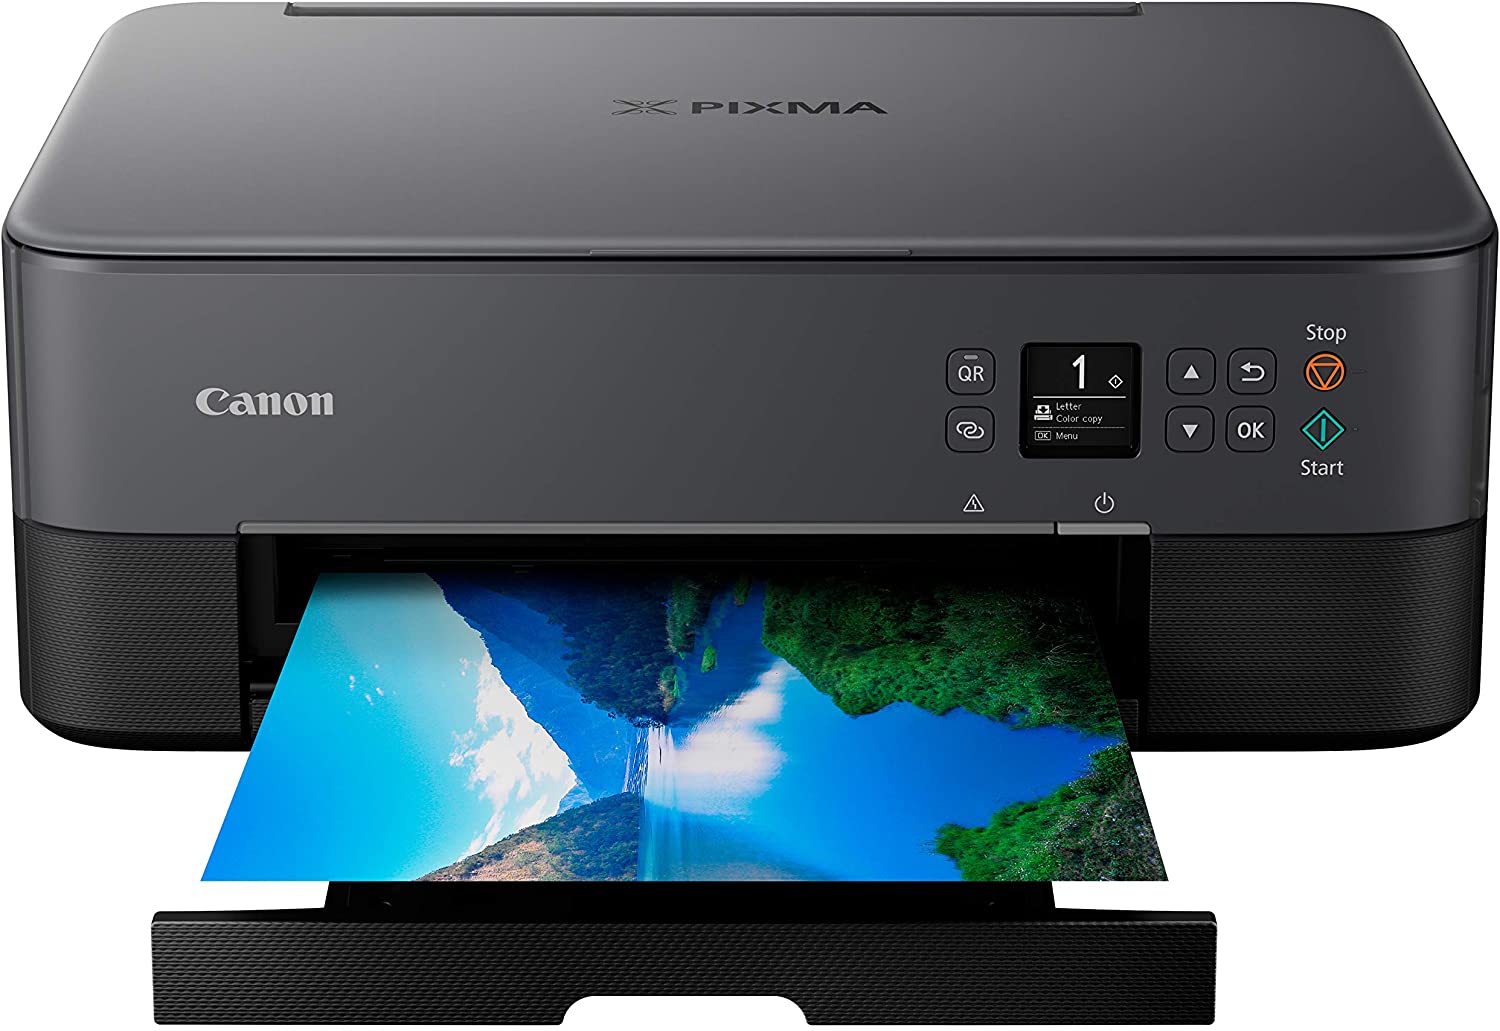 Best laser printer for home use - Canon PIXMA TS6420 